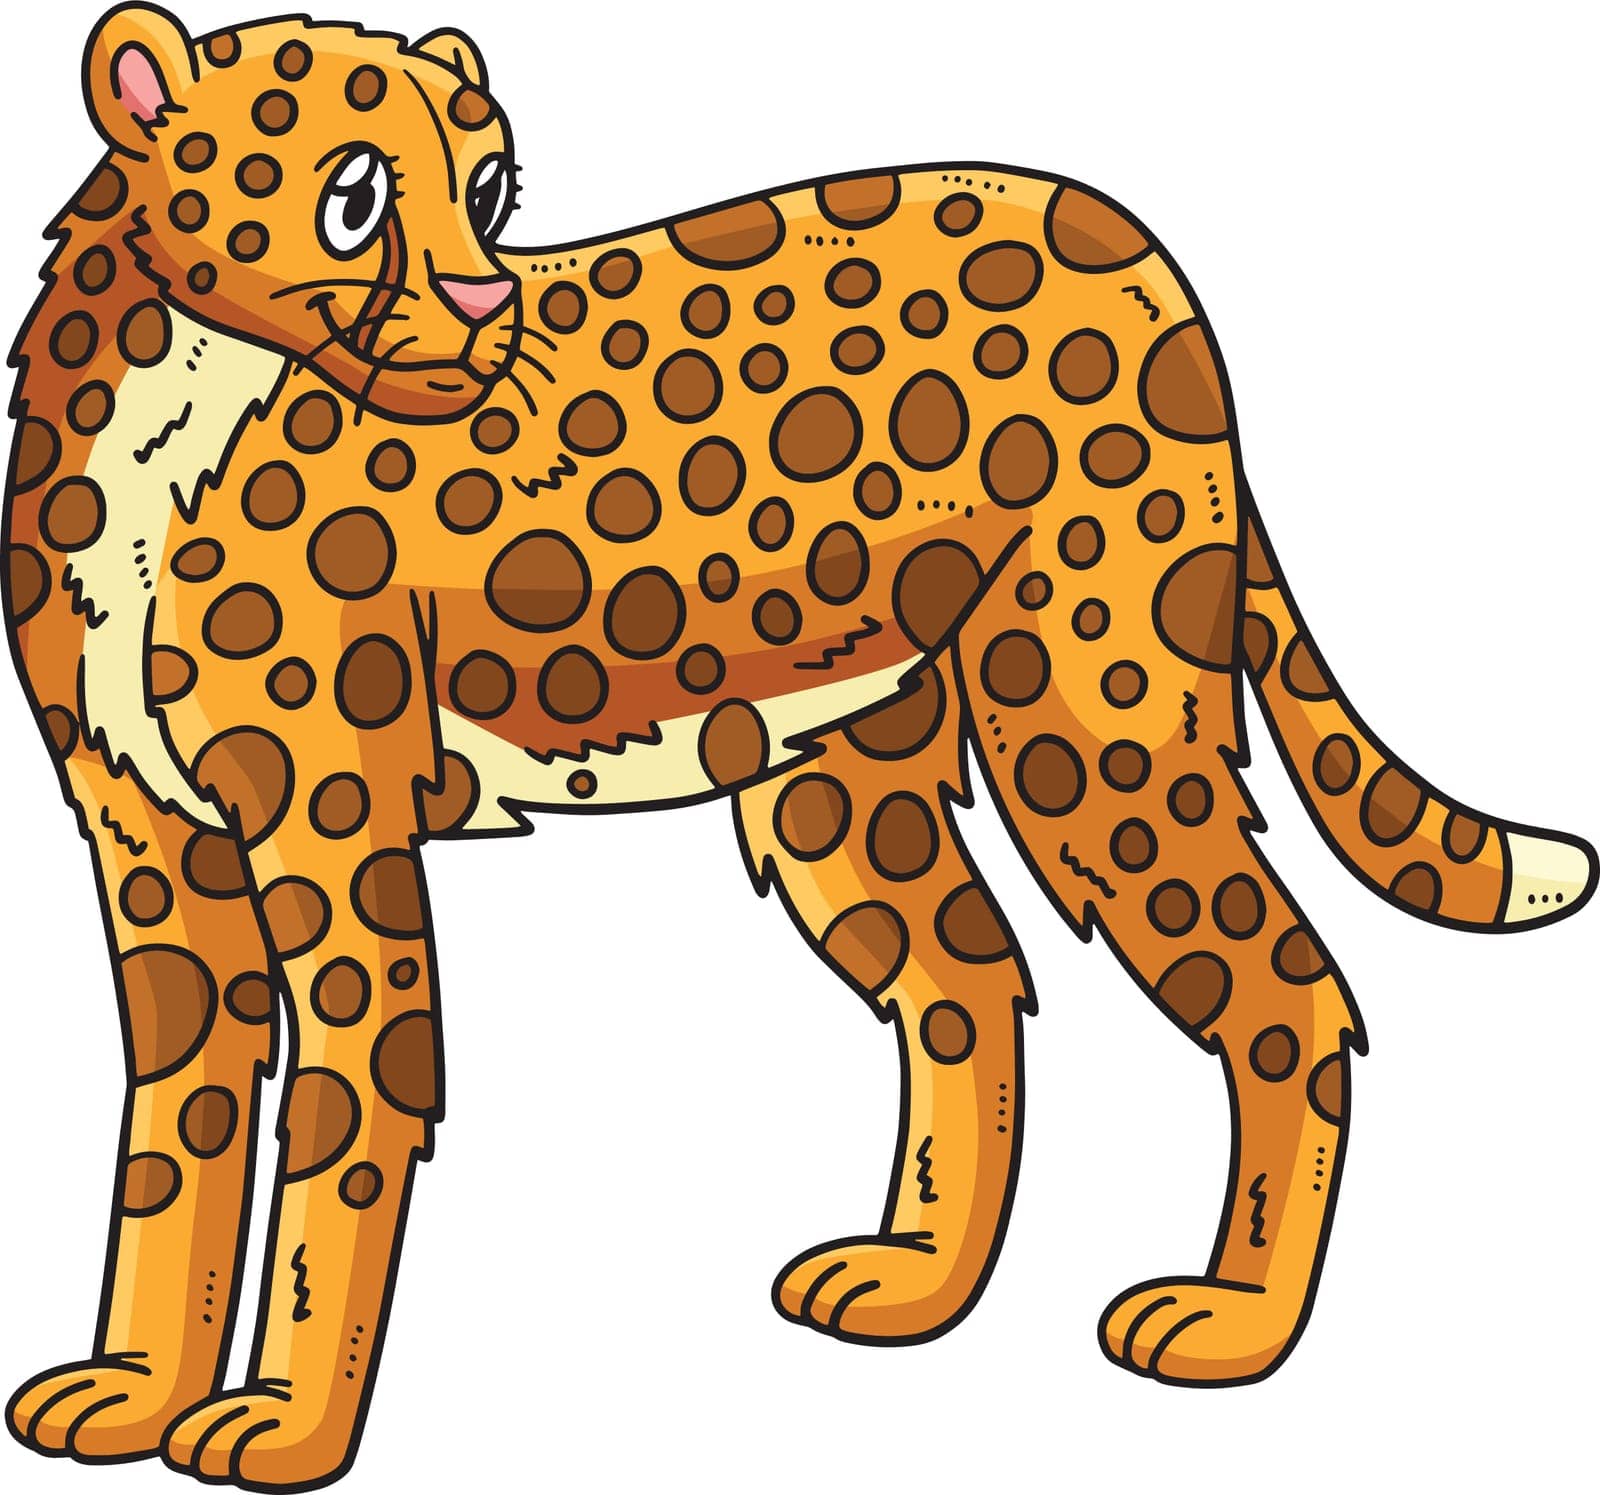 Mother Cheetah Cartoon Colored Clipart by abbydesign